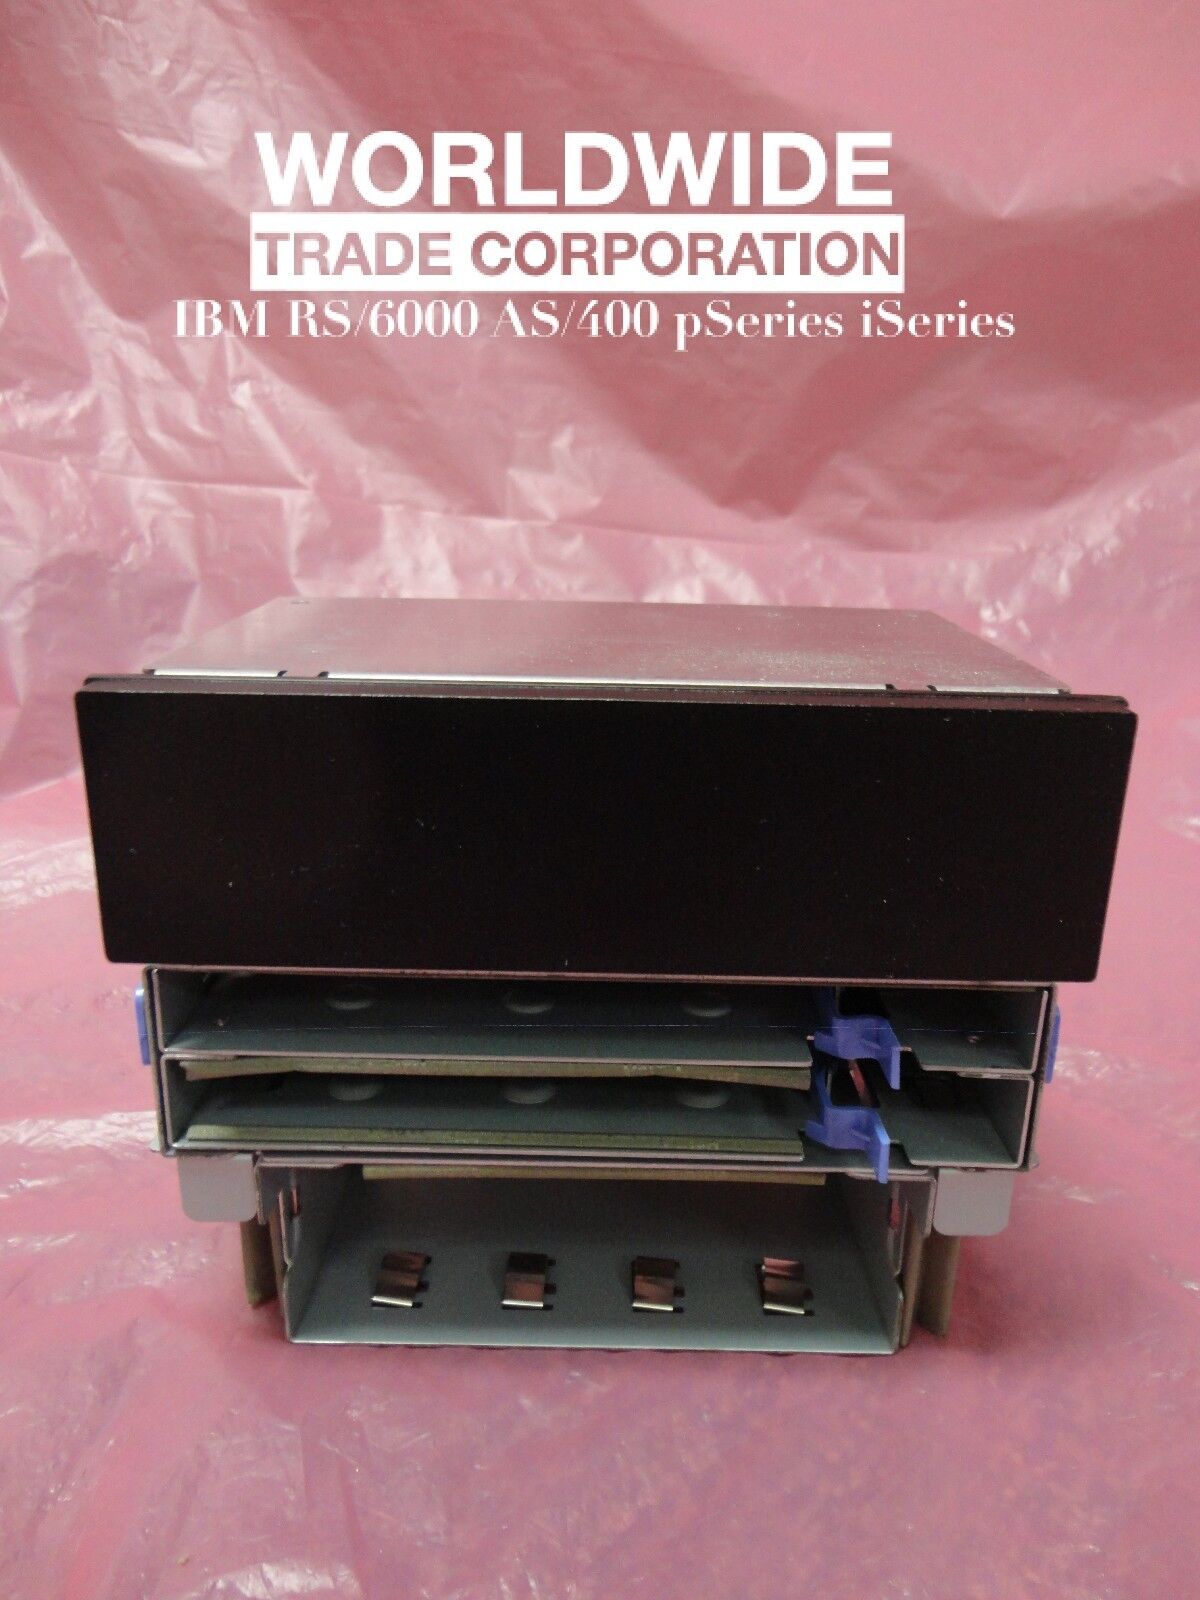 IBM 39J2523 7877 28D1 Media Backplane for 285 520 550 720 52A 55A 515 pSeries